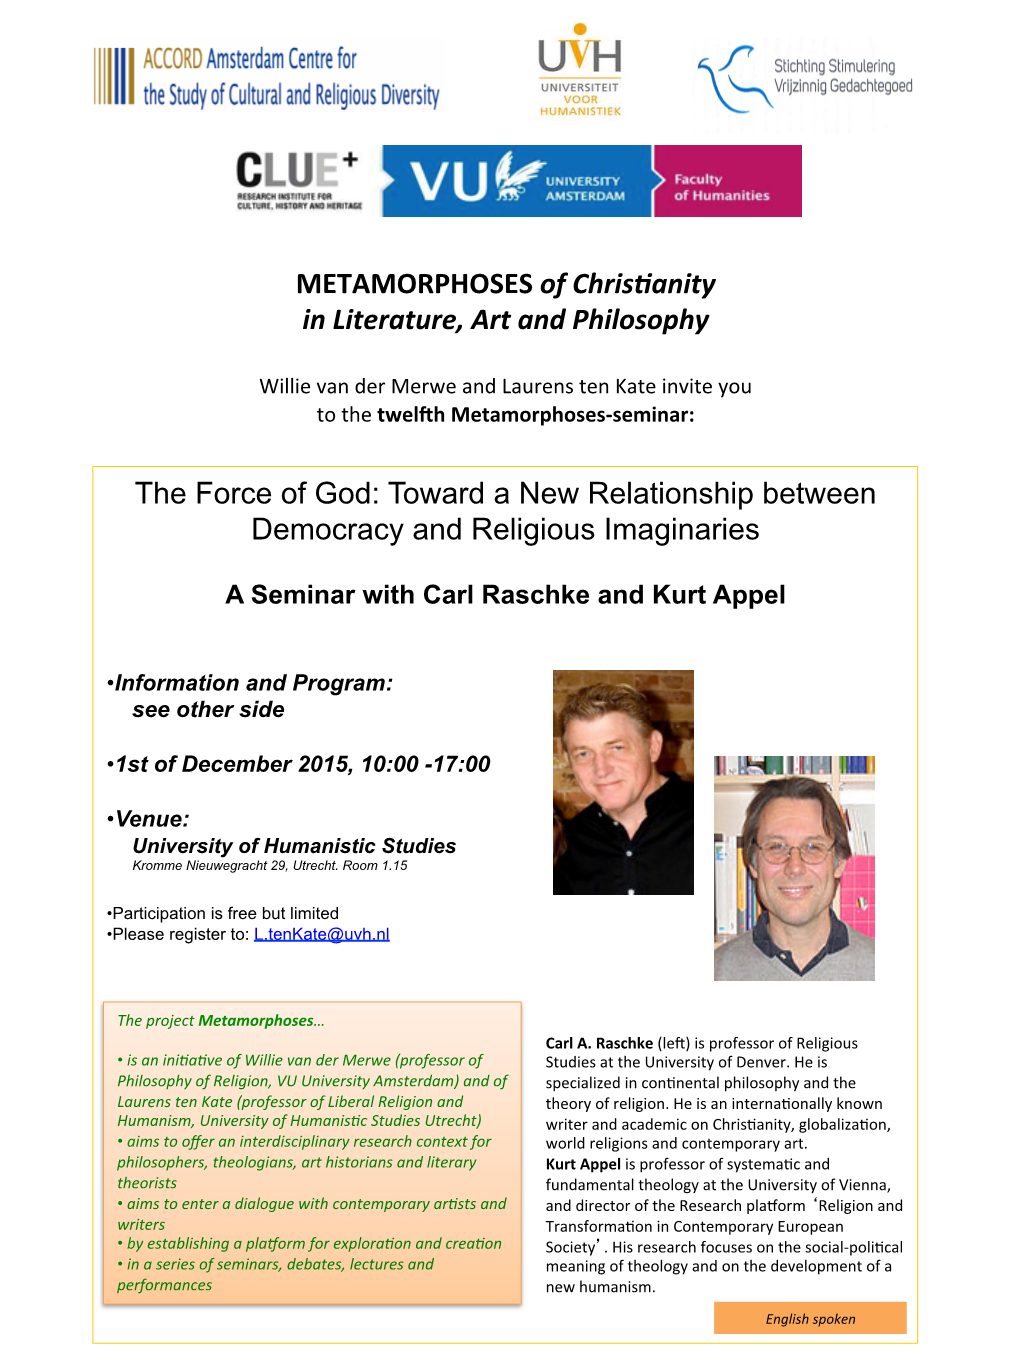 The Force of God: Toward a New Relationship Between Democracy and Religious Imaginaries